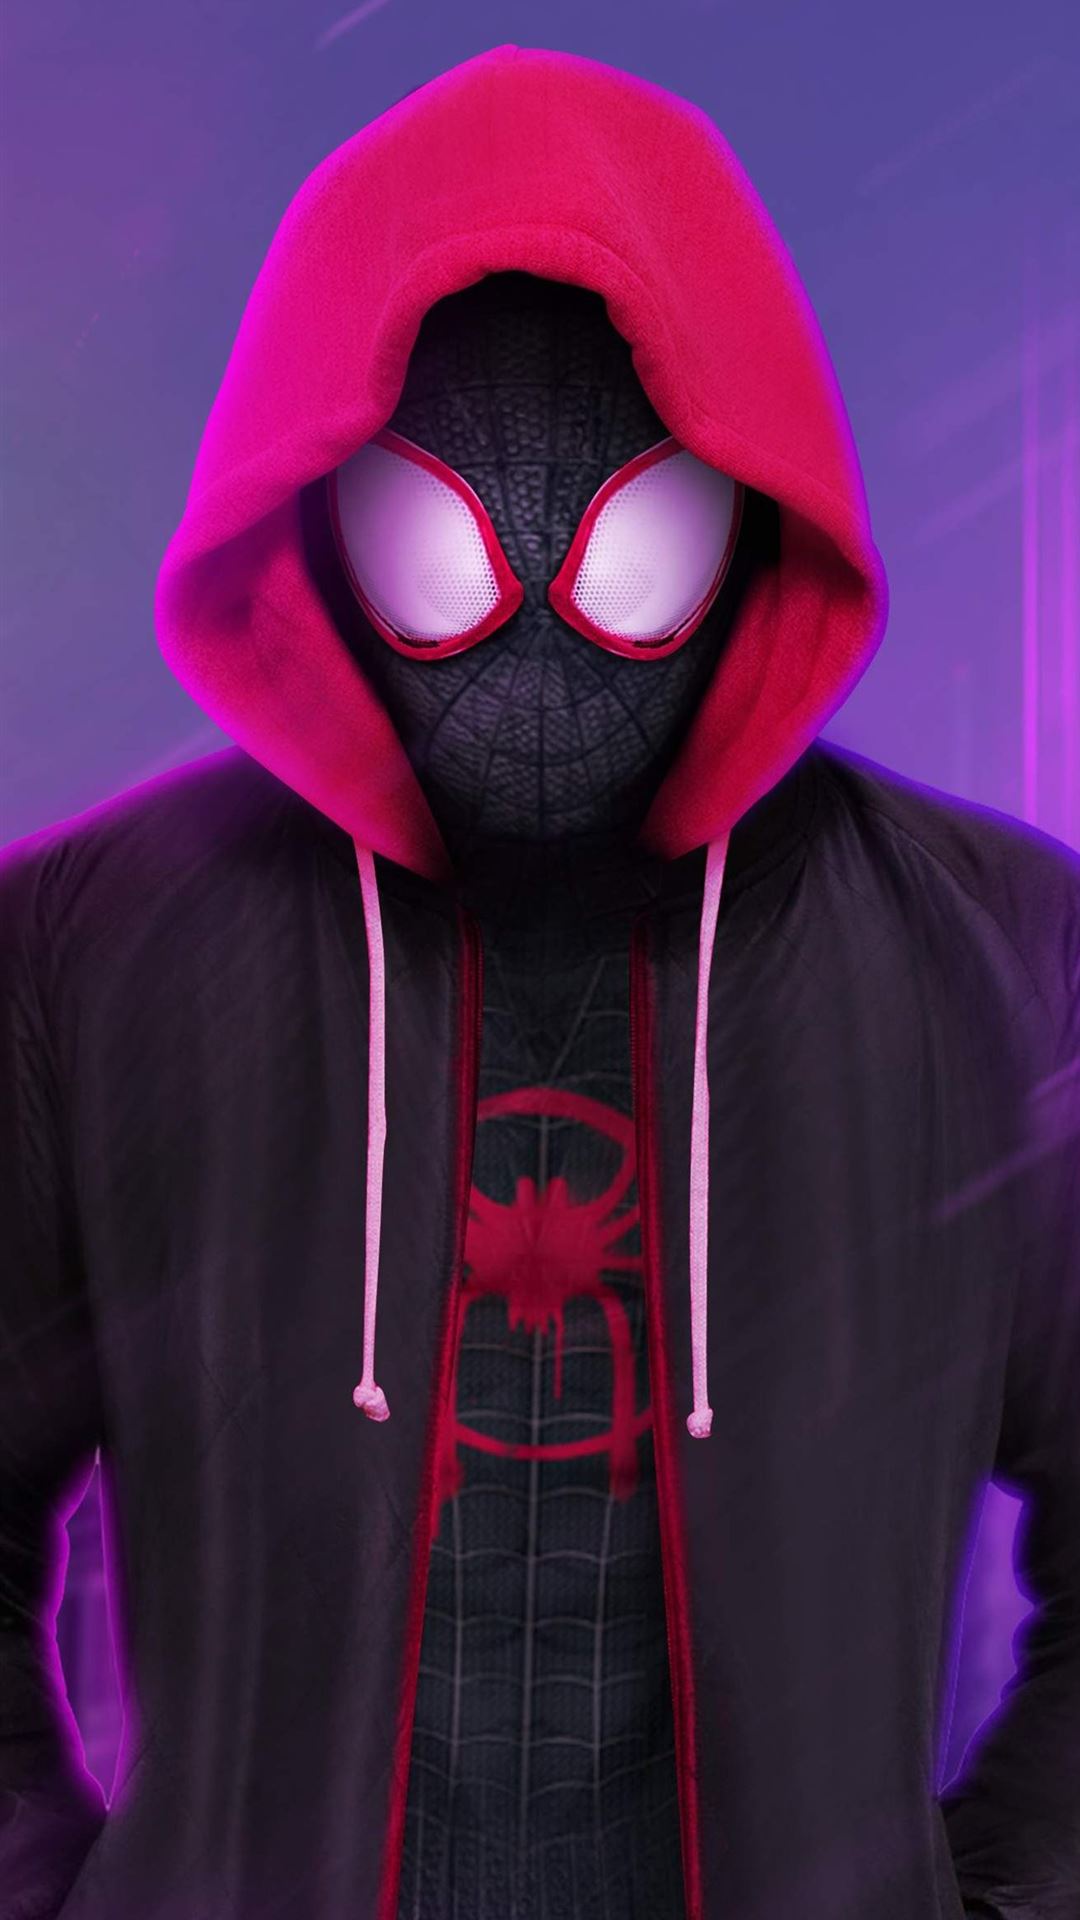 spider man into the spider verse iPhone Wallpapers Free Download